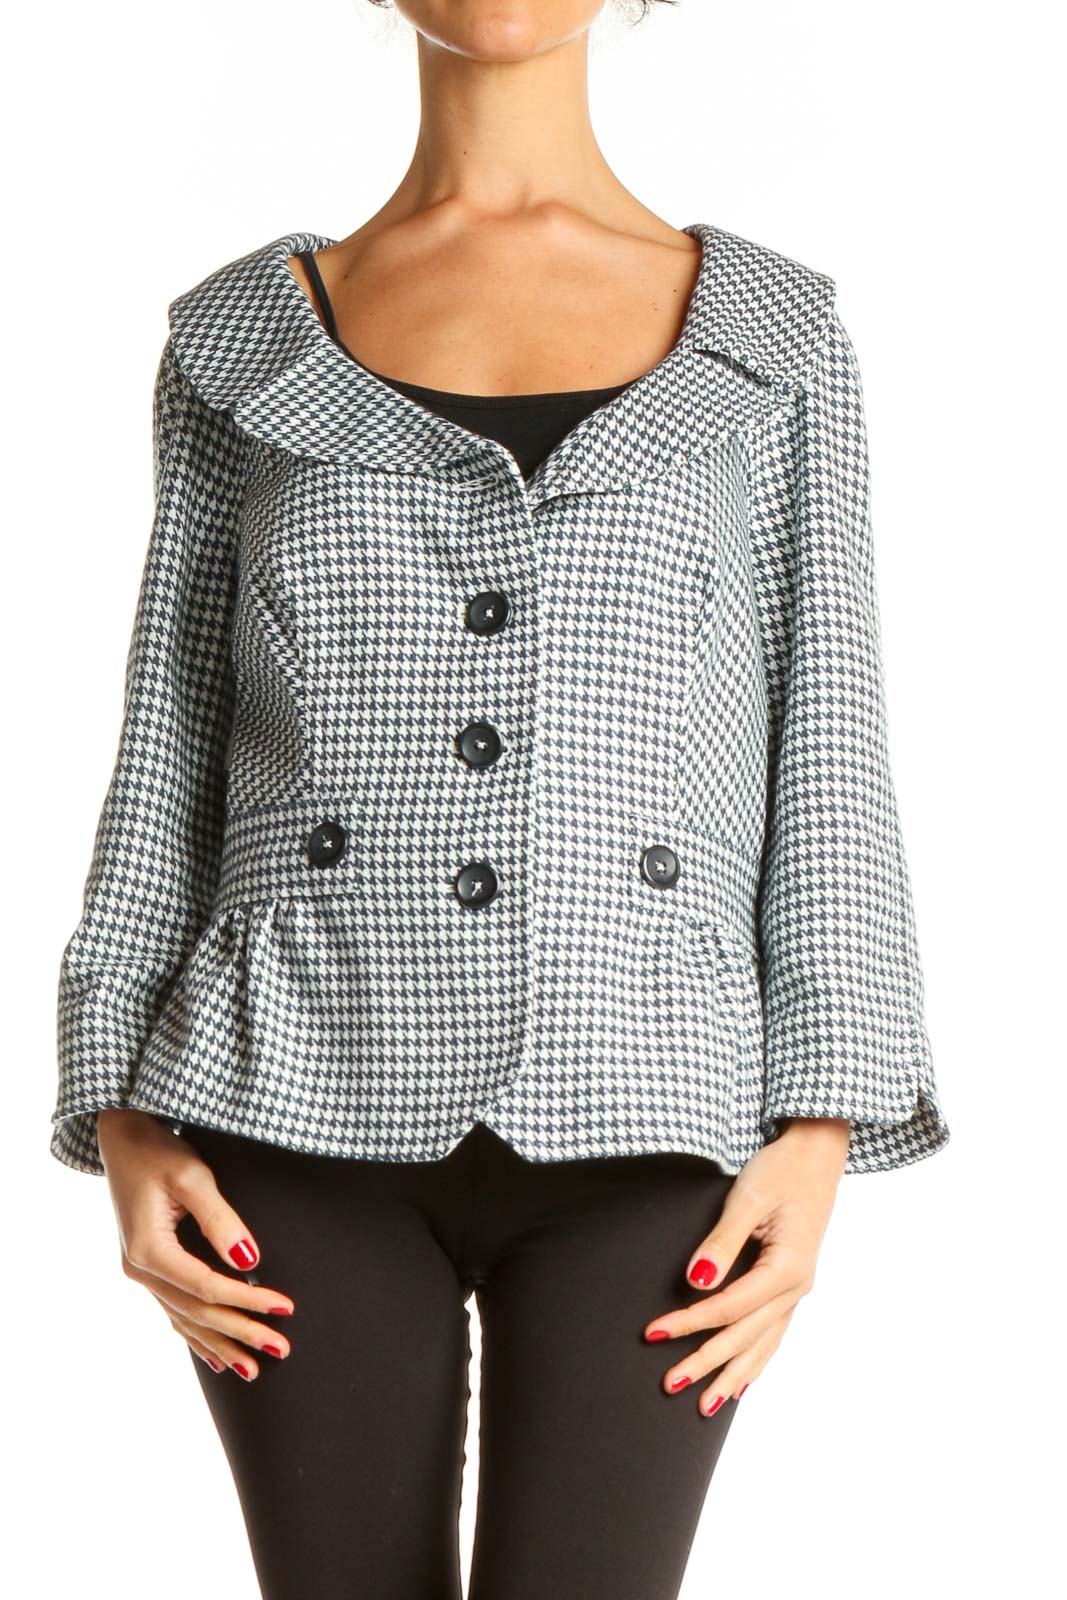 Blue and White Houndstooth Jacket Front